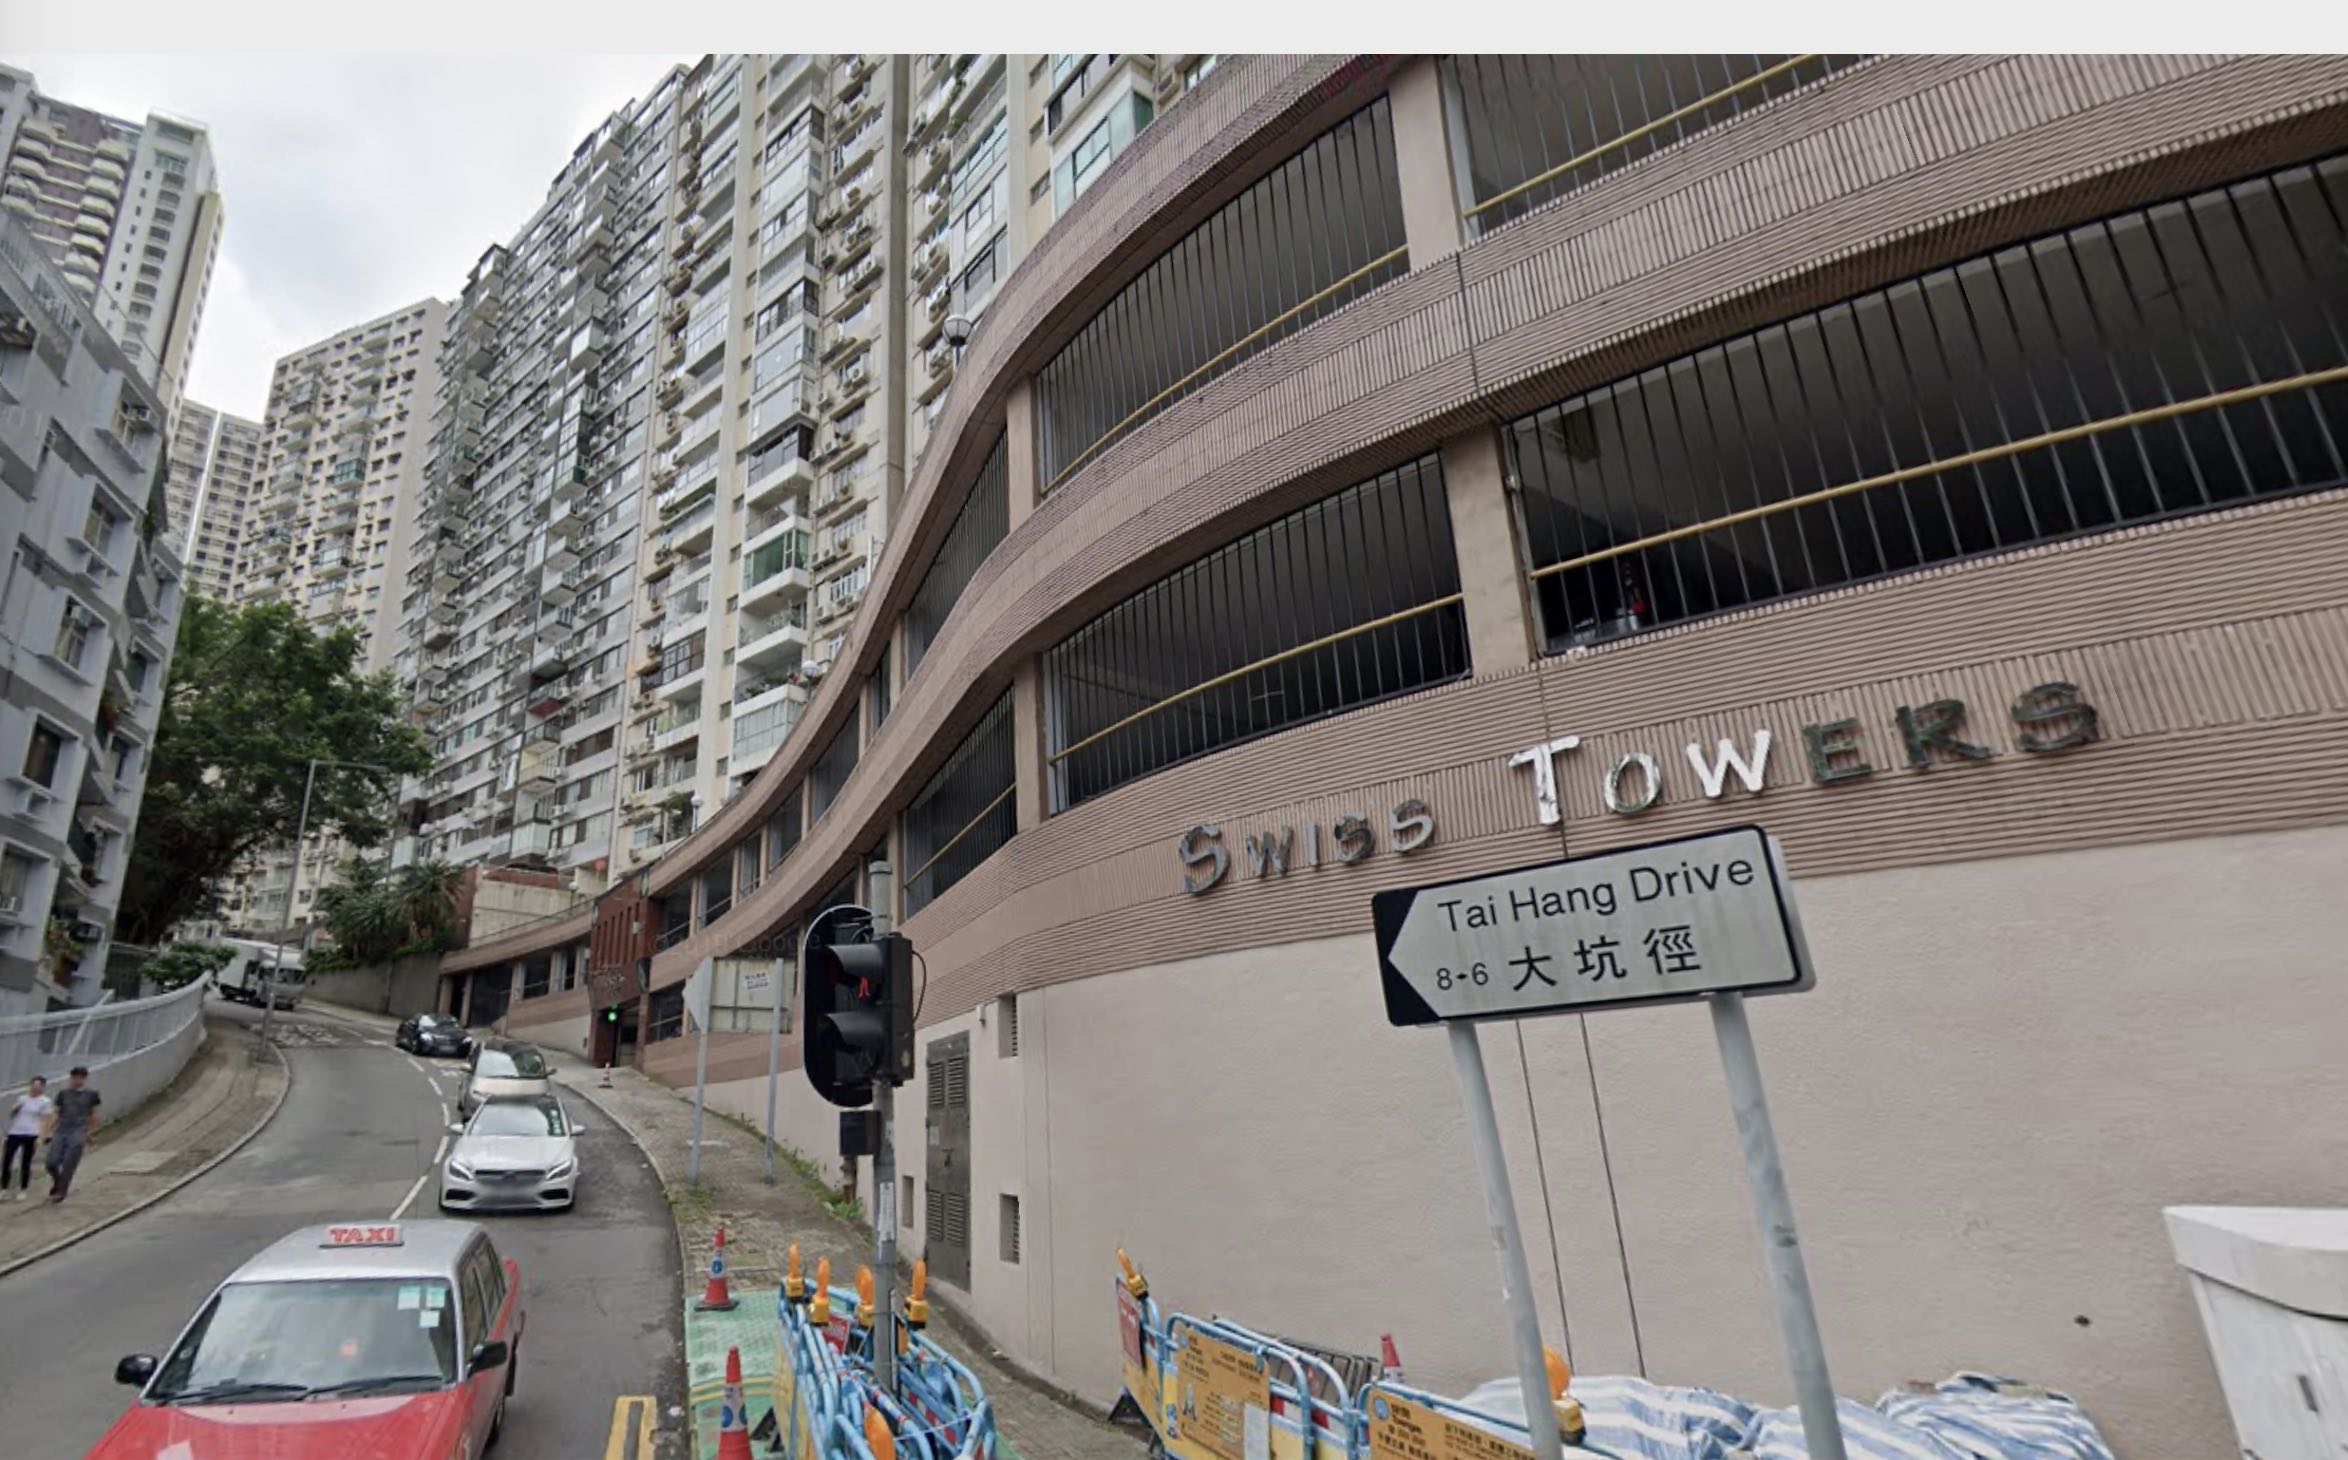 Swiss Towers in Tai Hang, the home of two people — a 60-year-old local woman and a domestic worker — confirmed to have the coronavirus. On Friday officials confirmed that the woman’s pet dog also tested ‘weak positive’ for the virus. Screenshot via Google Maps.